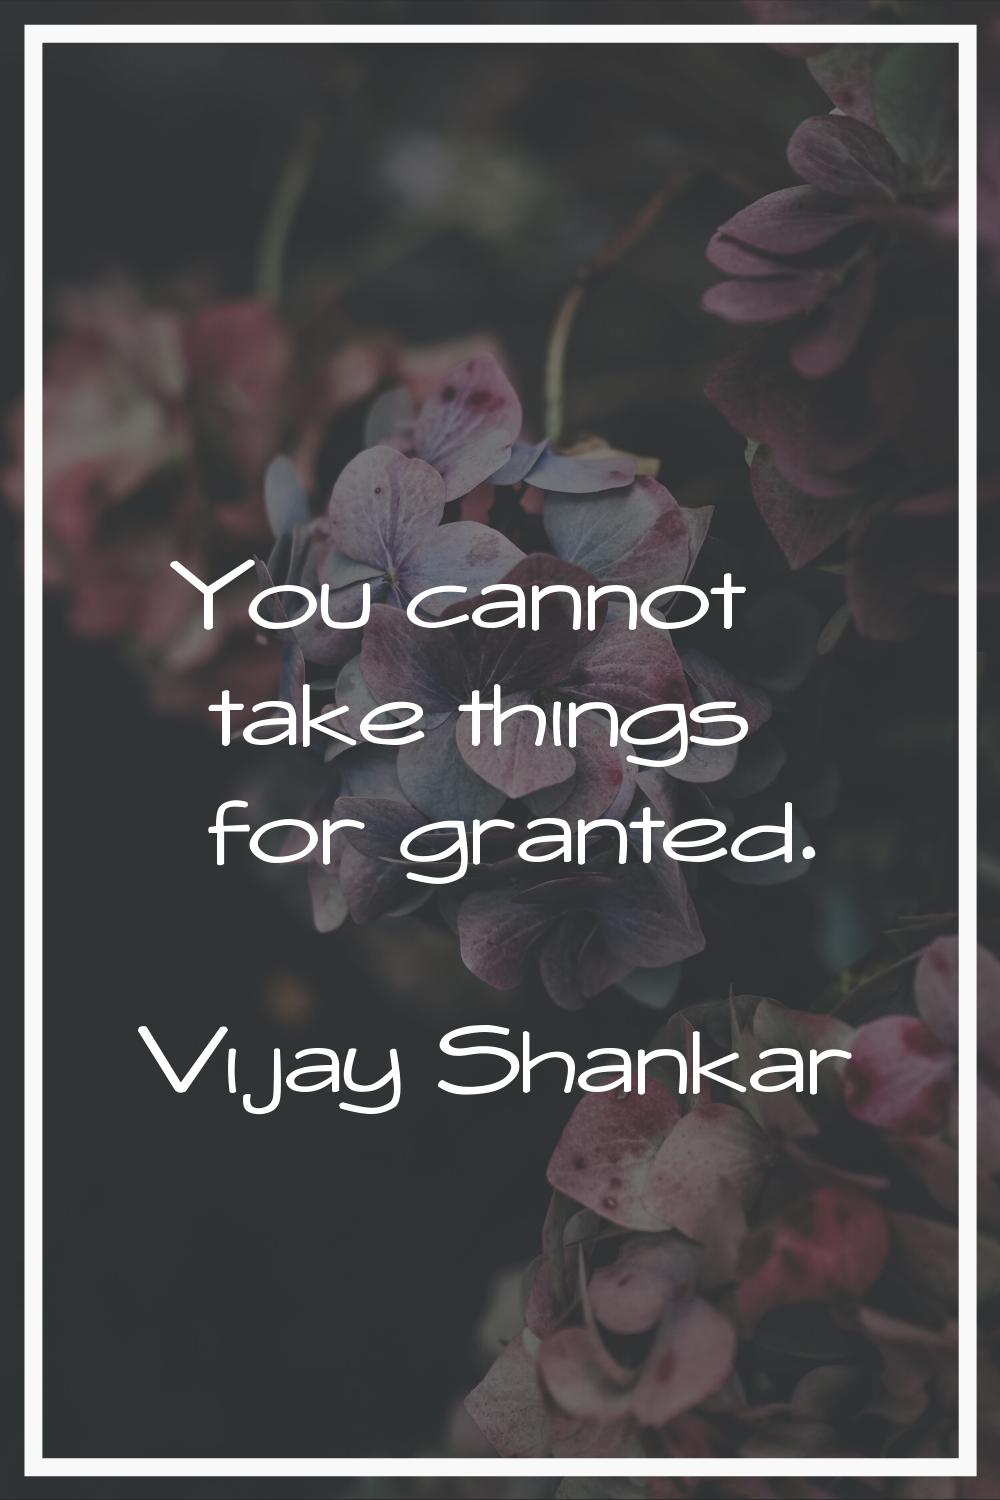 You cannot take things for granted.